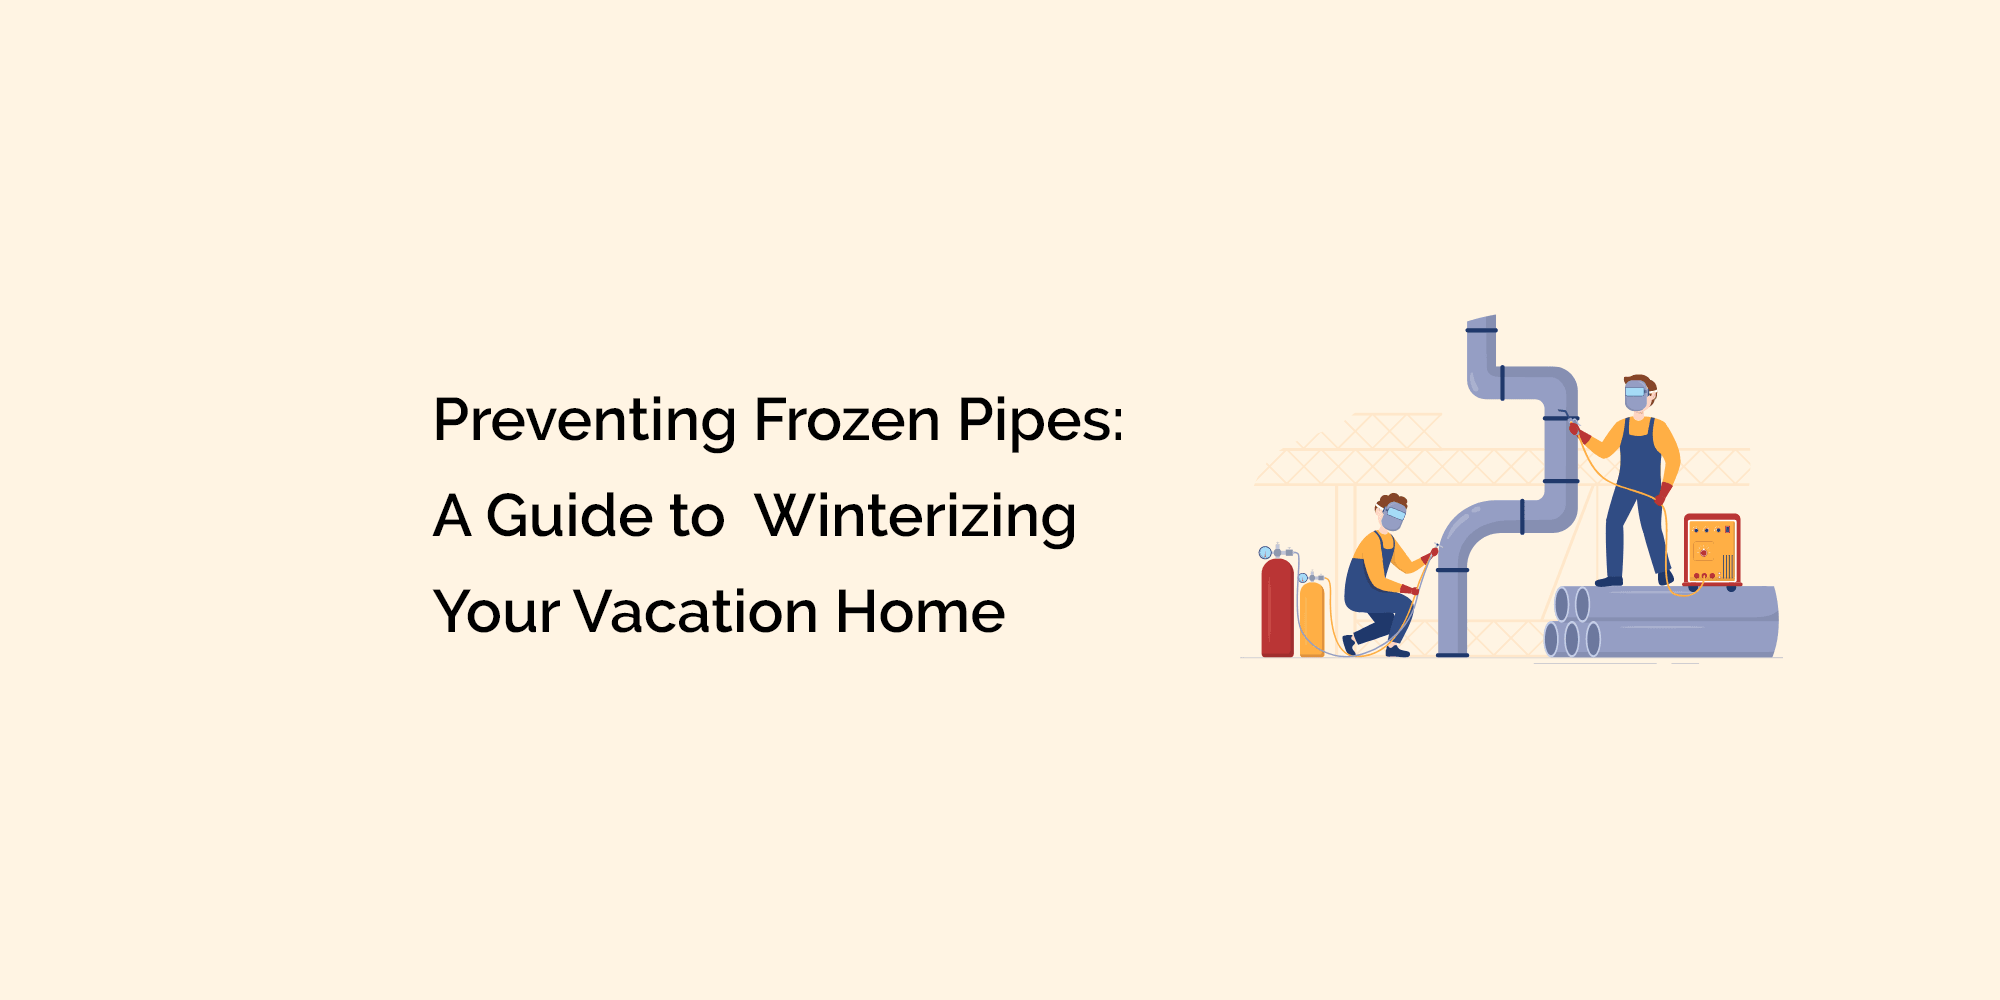 Preventing Frozen Pipes: A Guide to Winterizing Your Vacation Home